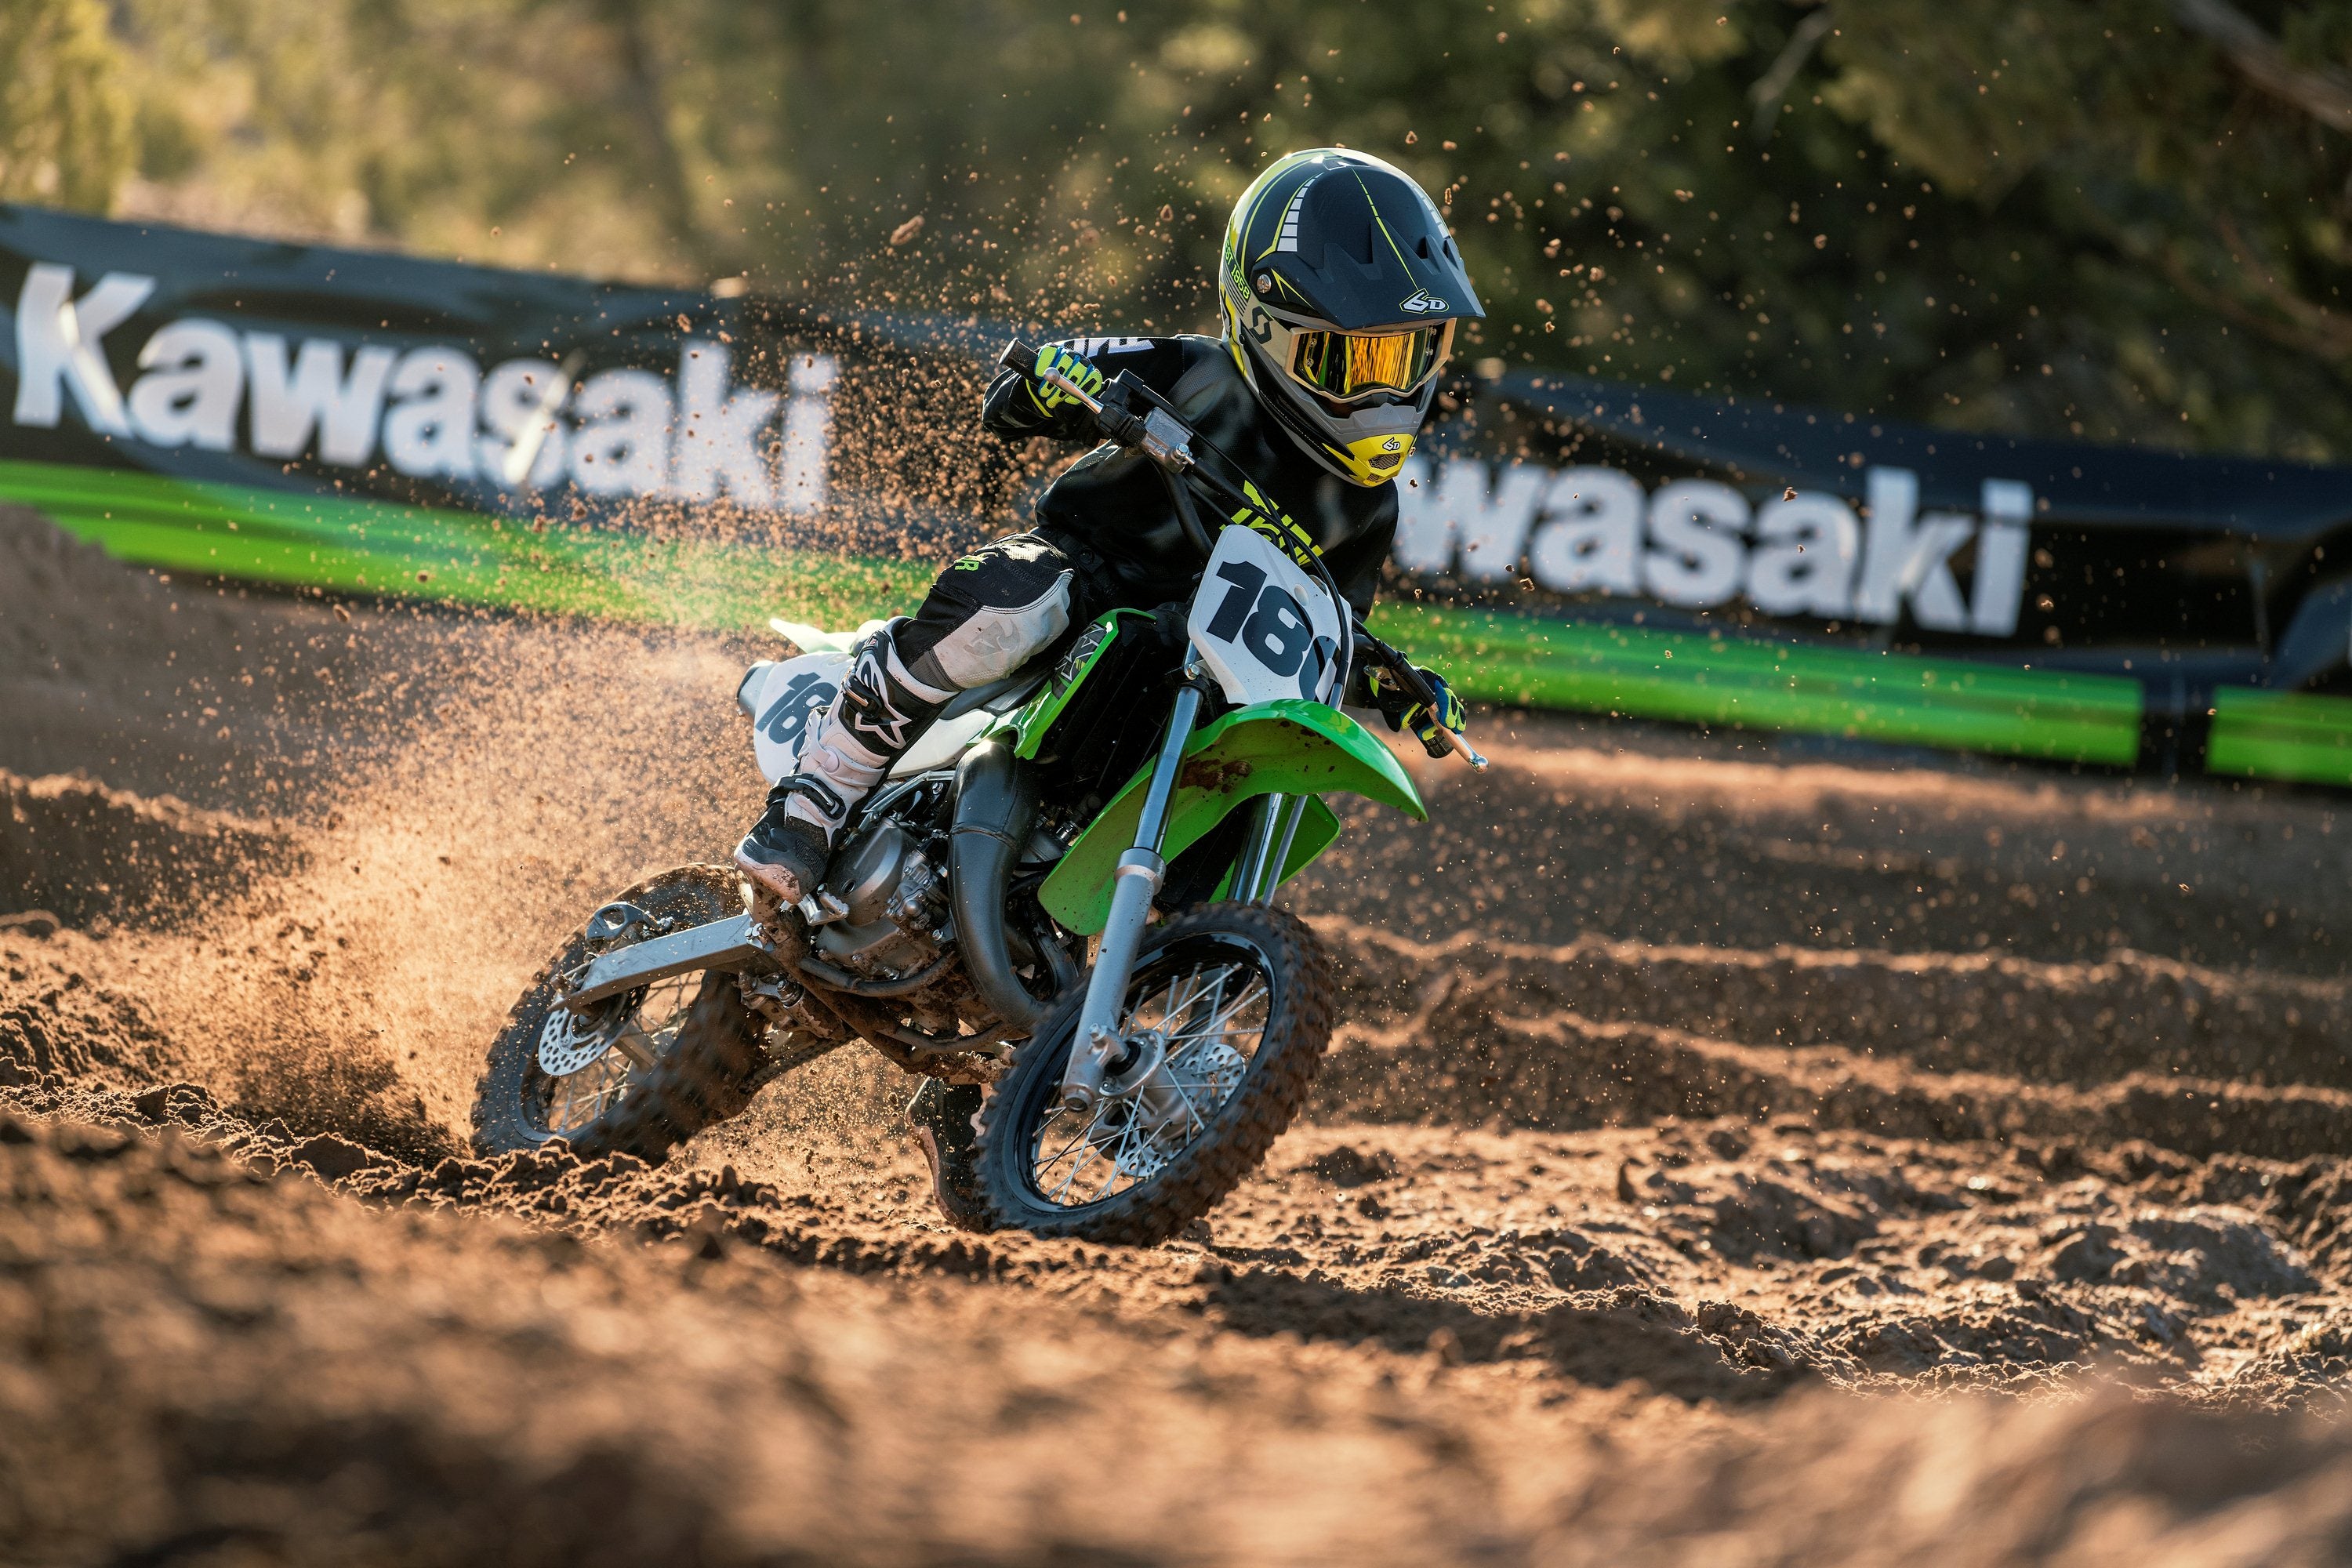 The KX ™ 65 is the most compact bike in the Kawasaki KX lineup